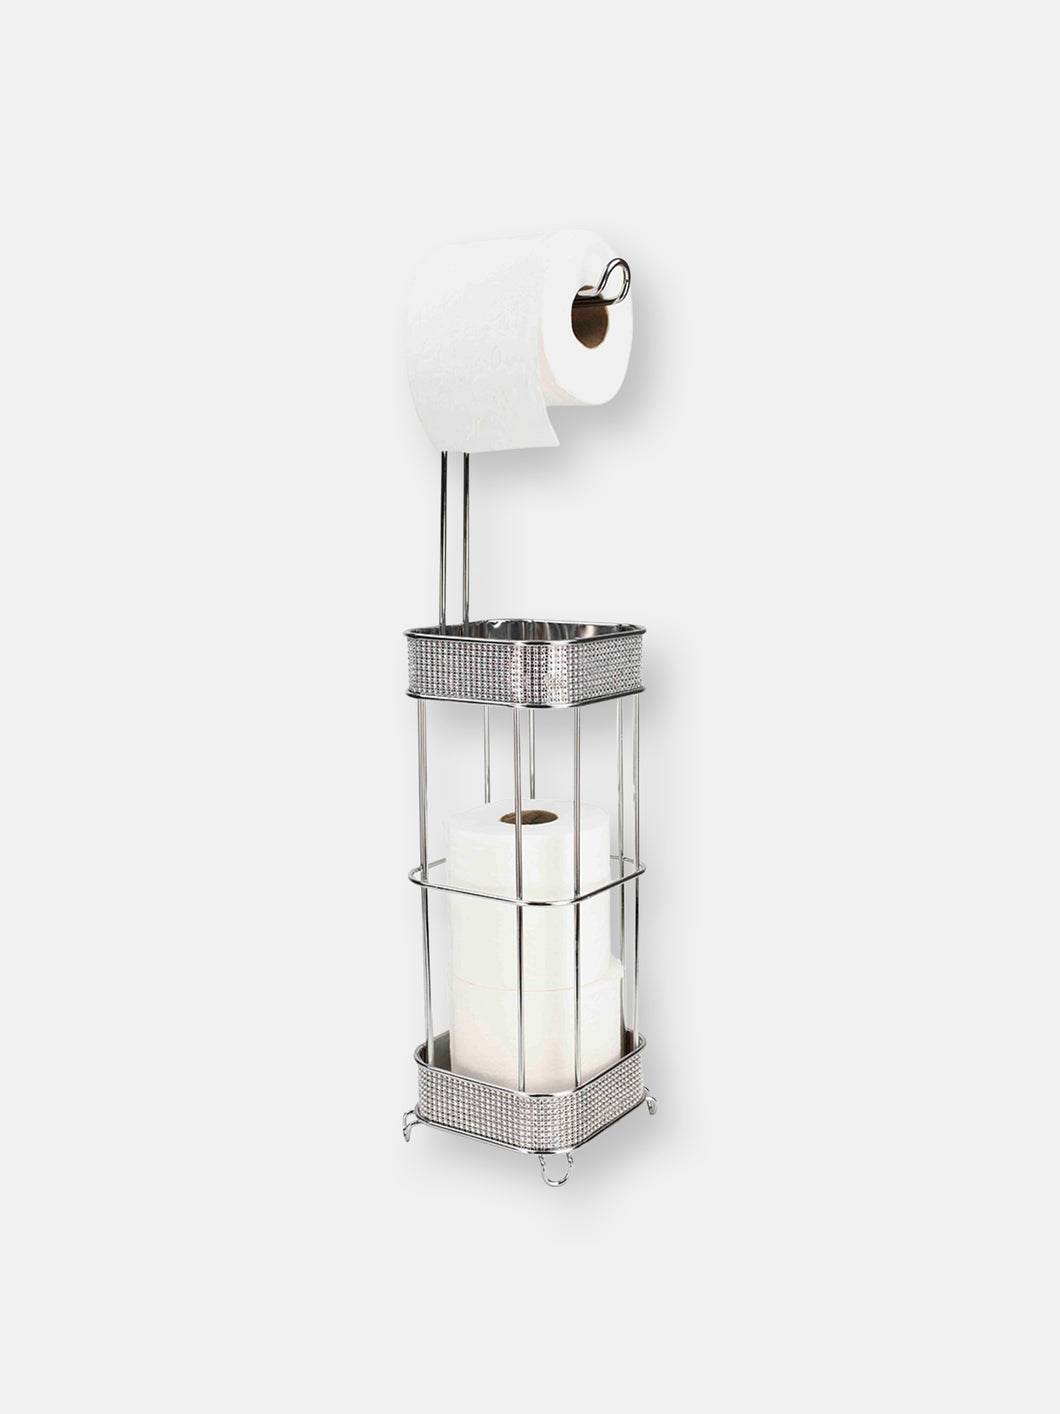 Diamond Collection Free-Standing Dispensing Toilet Paper Holder, Chrome